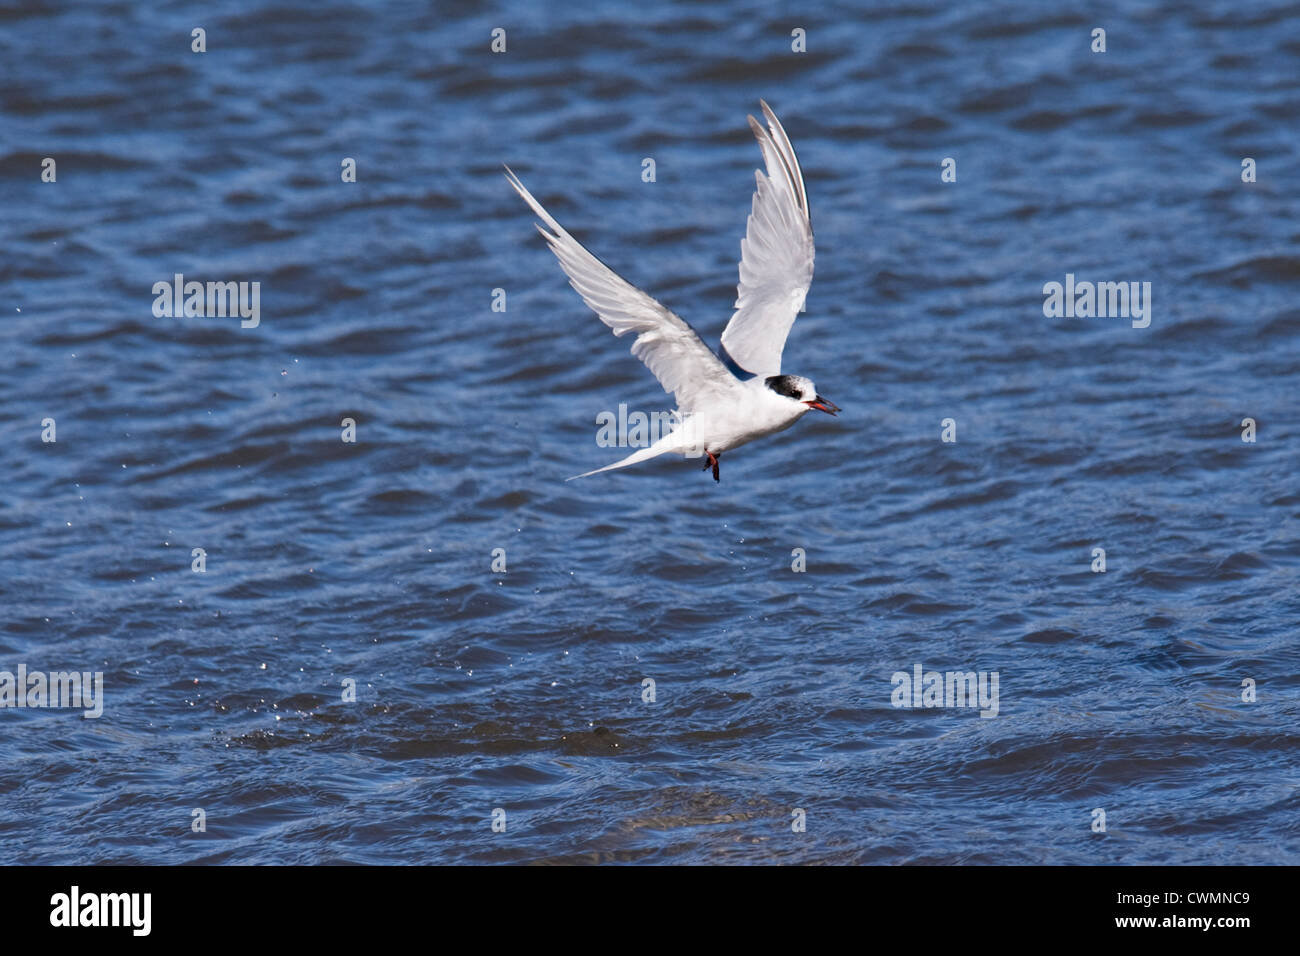 Antarctic Tern (Sterna vittata) adult animal in flight with Krill in its mouth. South Georgia, South Atlantic Ocean. Stock Photo